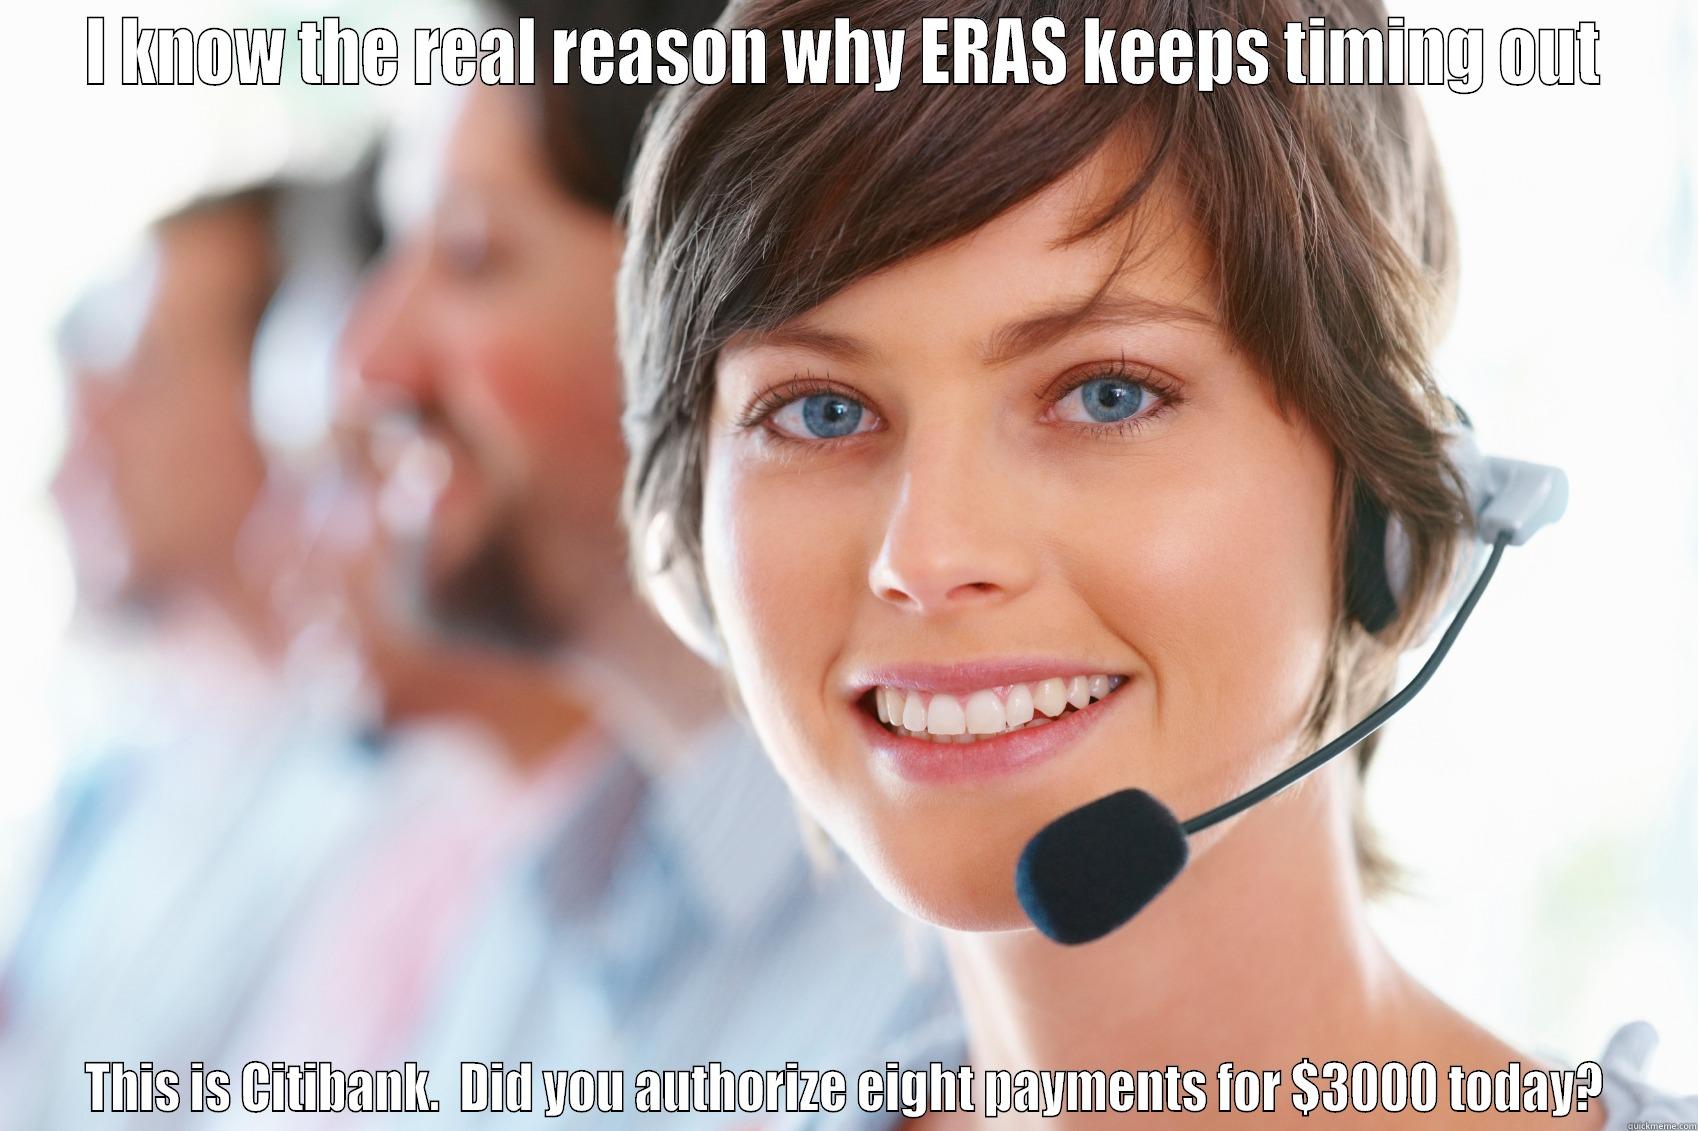 ERAS operator - I KNOW THE REAL REASON WHY ERAS KEEPS TIMING OUT THIS IS CITIBANK.  DID YOU AUTHORIZE EIGHT PAYMENTS FOR $3000 TODAY? Misc